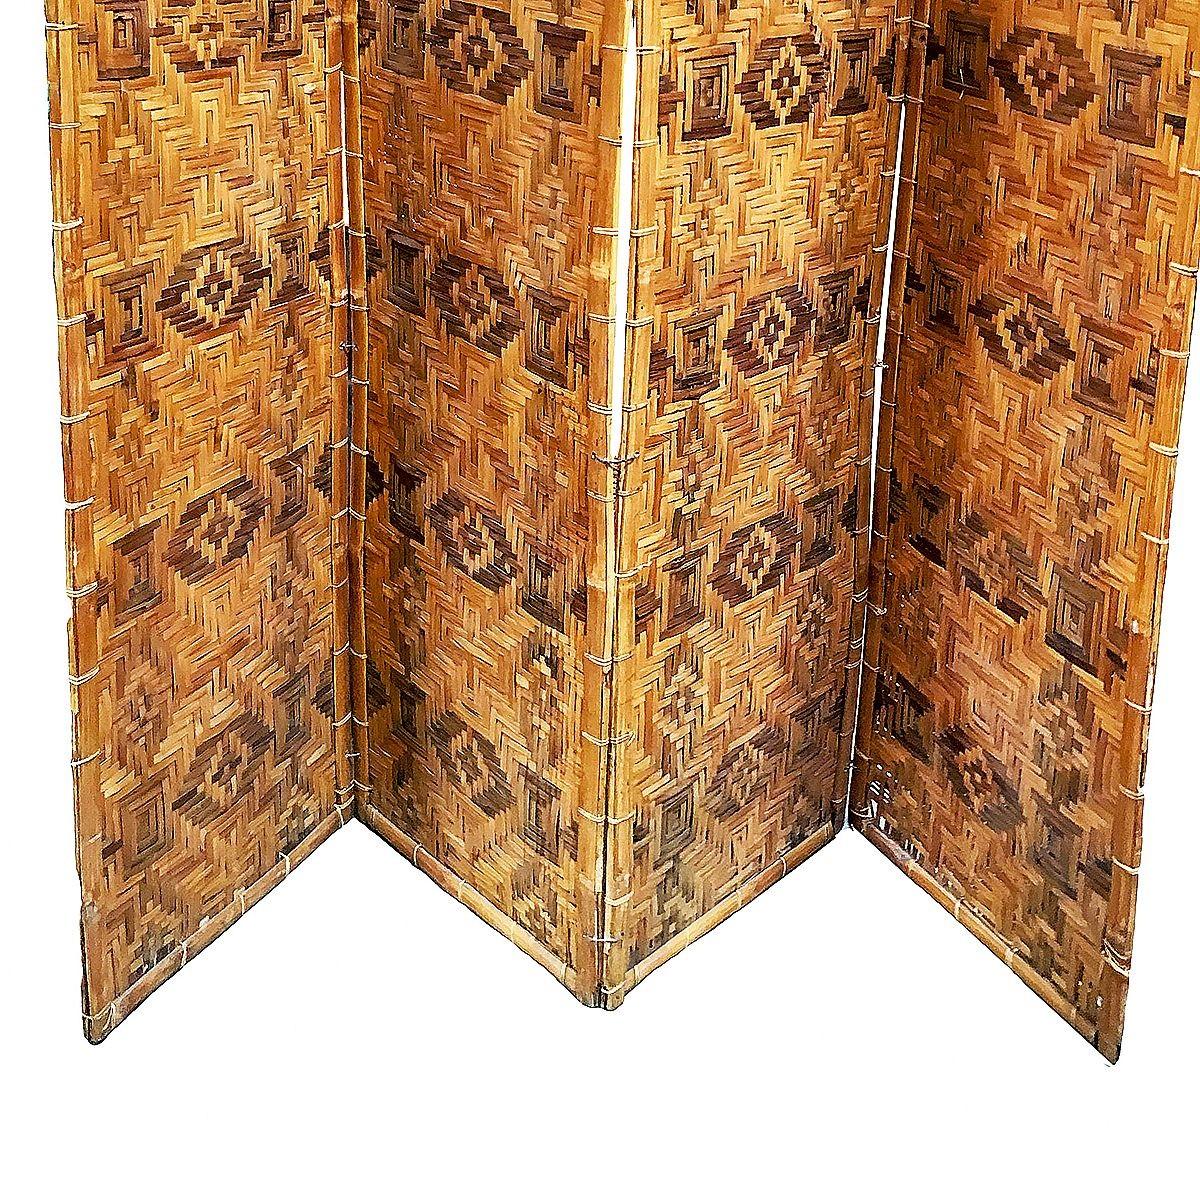 Hand-Woven Restored Bamboo & Woven Wicker 4 Panel Folding Screen , 1920 For Sale